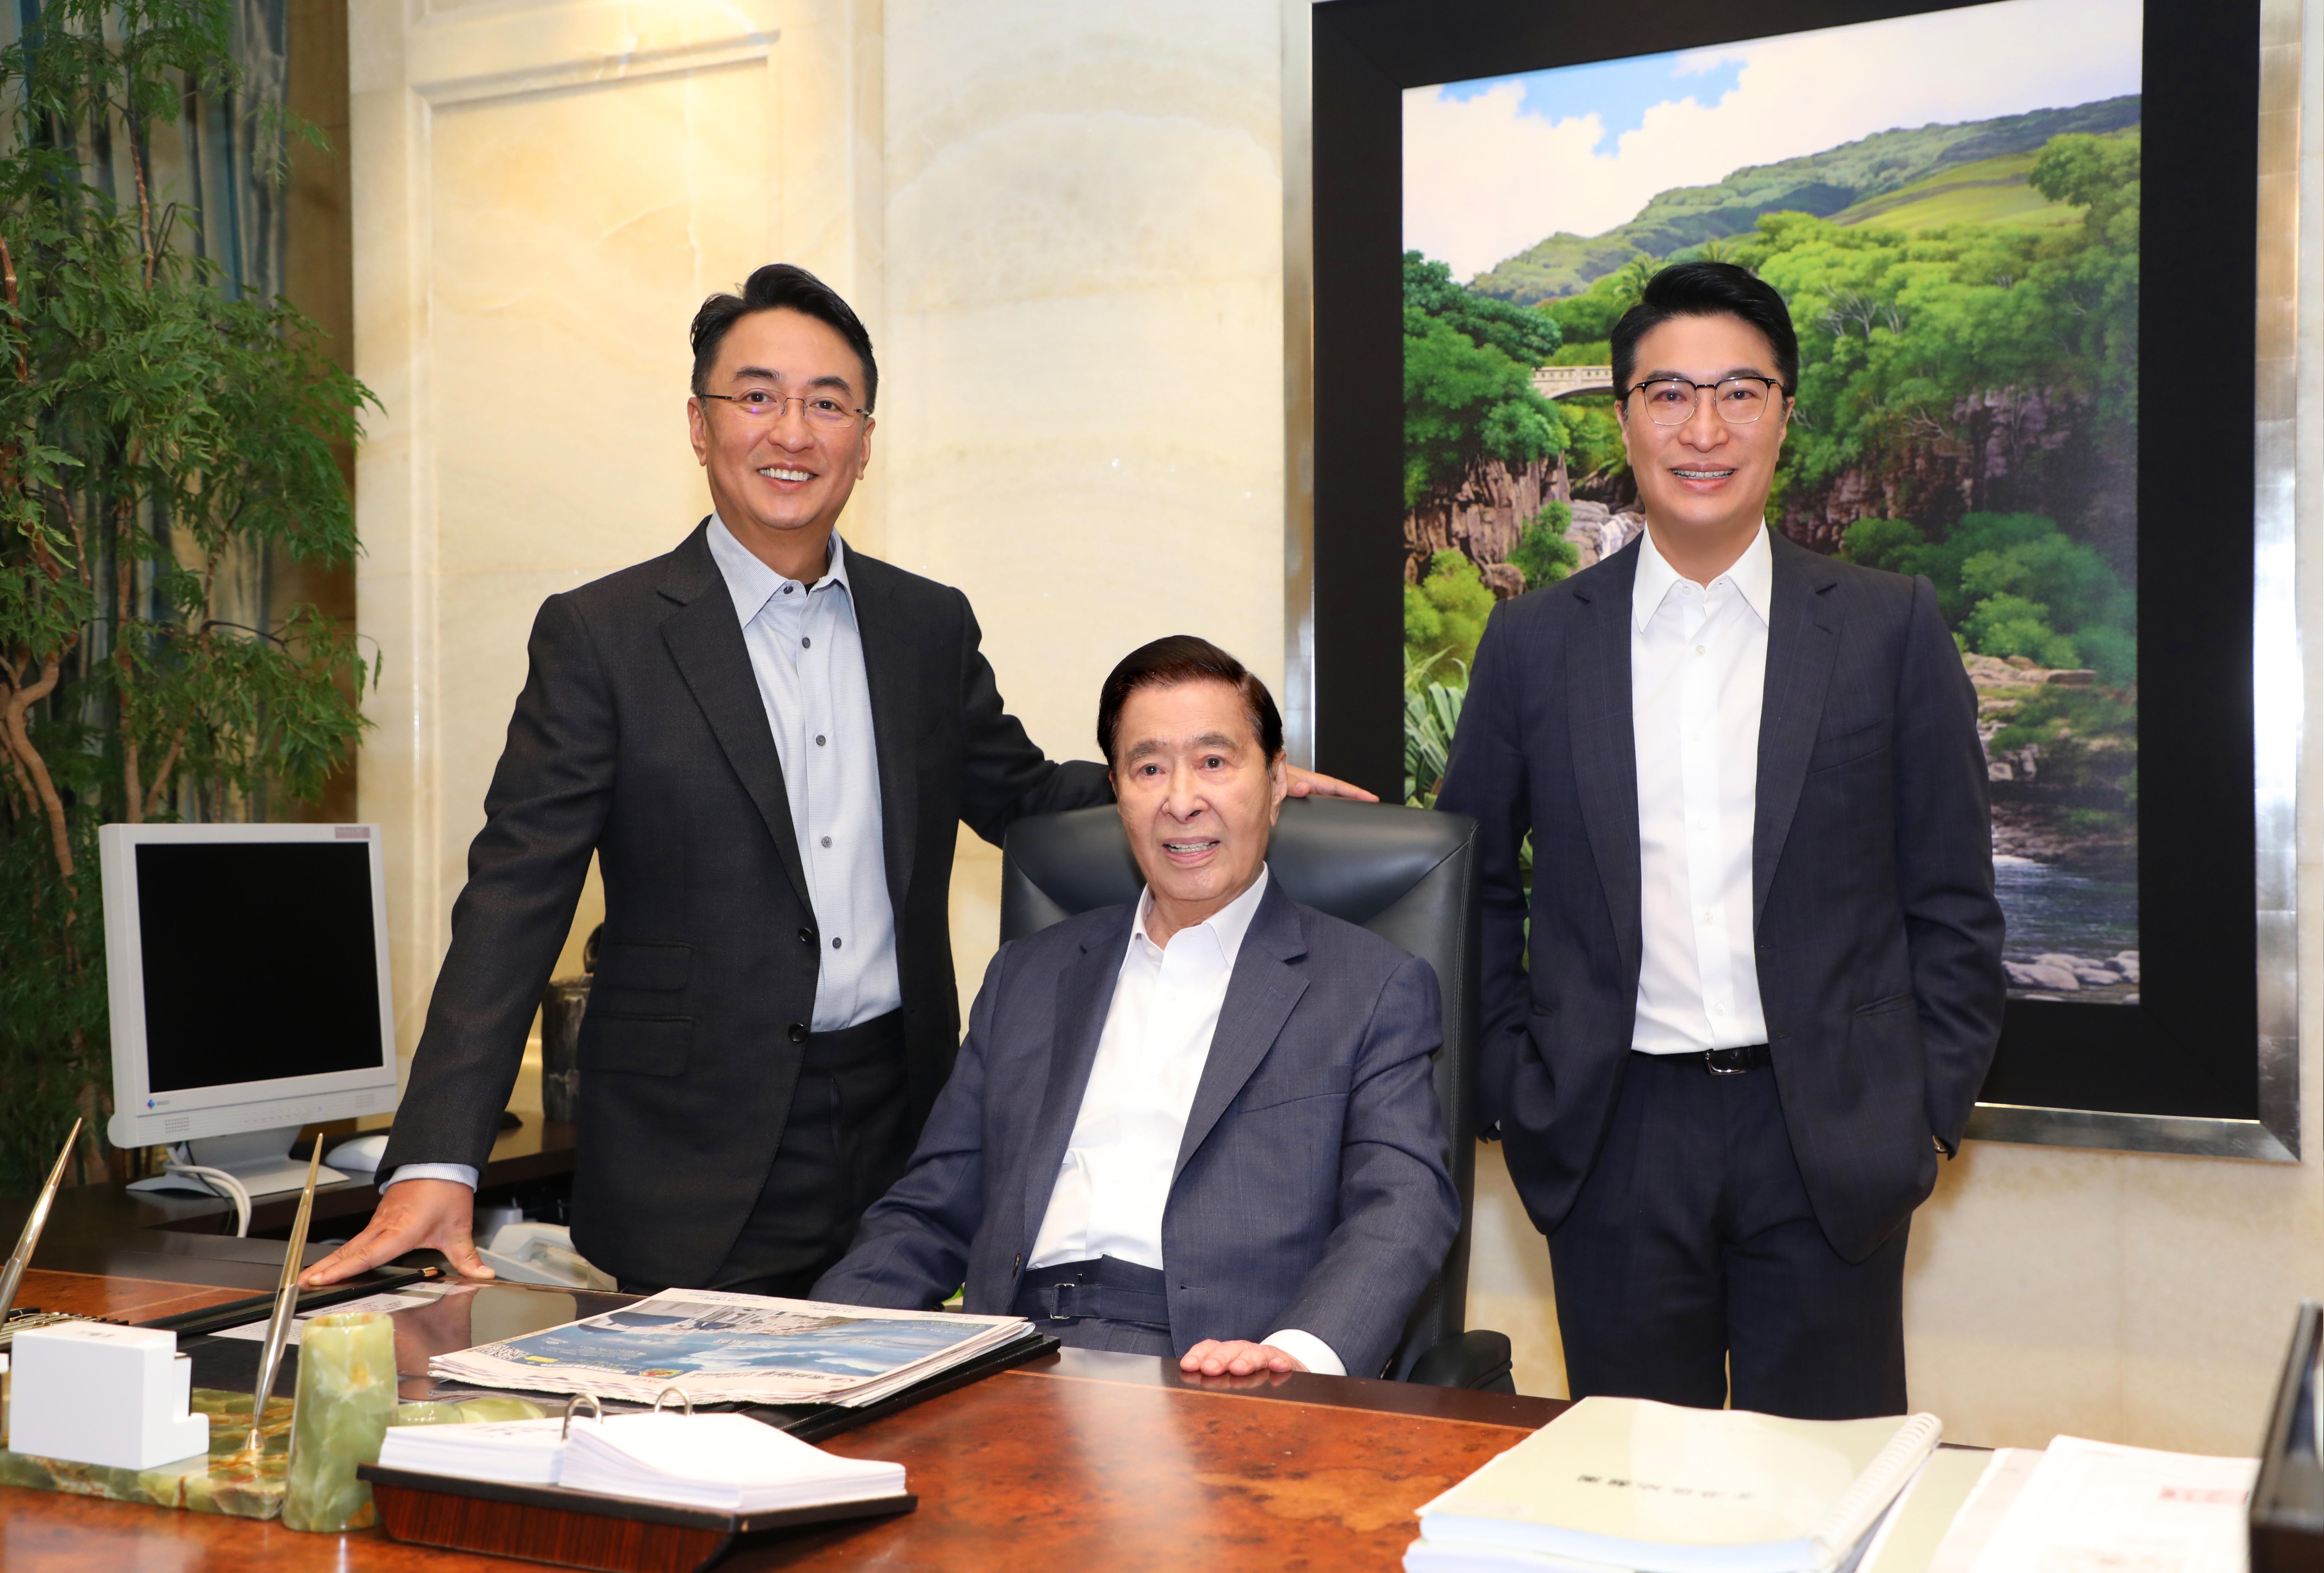 Lee Shau-kee, Hong Kong’s richest man, stepped down from his role as chairman of Henderson Land last year, and divided responsibilities at the property company between sons Peter Lee Ka-kit and Martin Lee Ka-shing. Photo: Handout